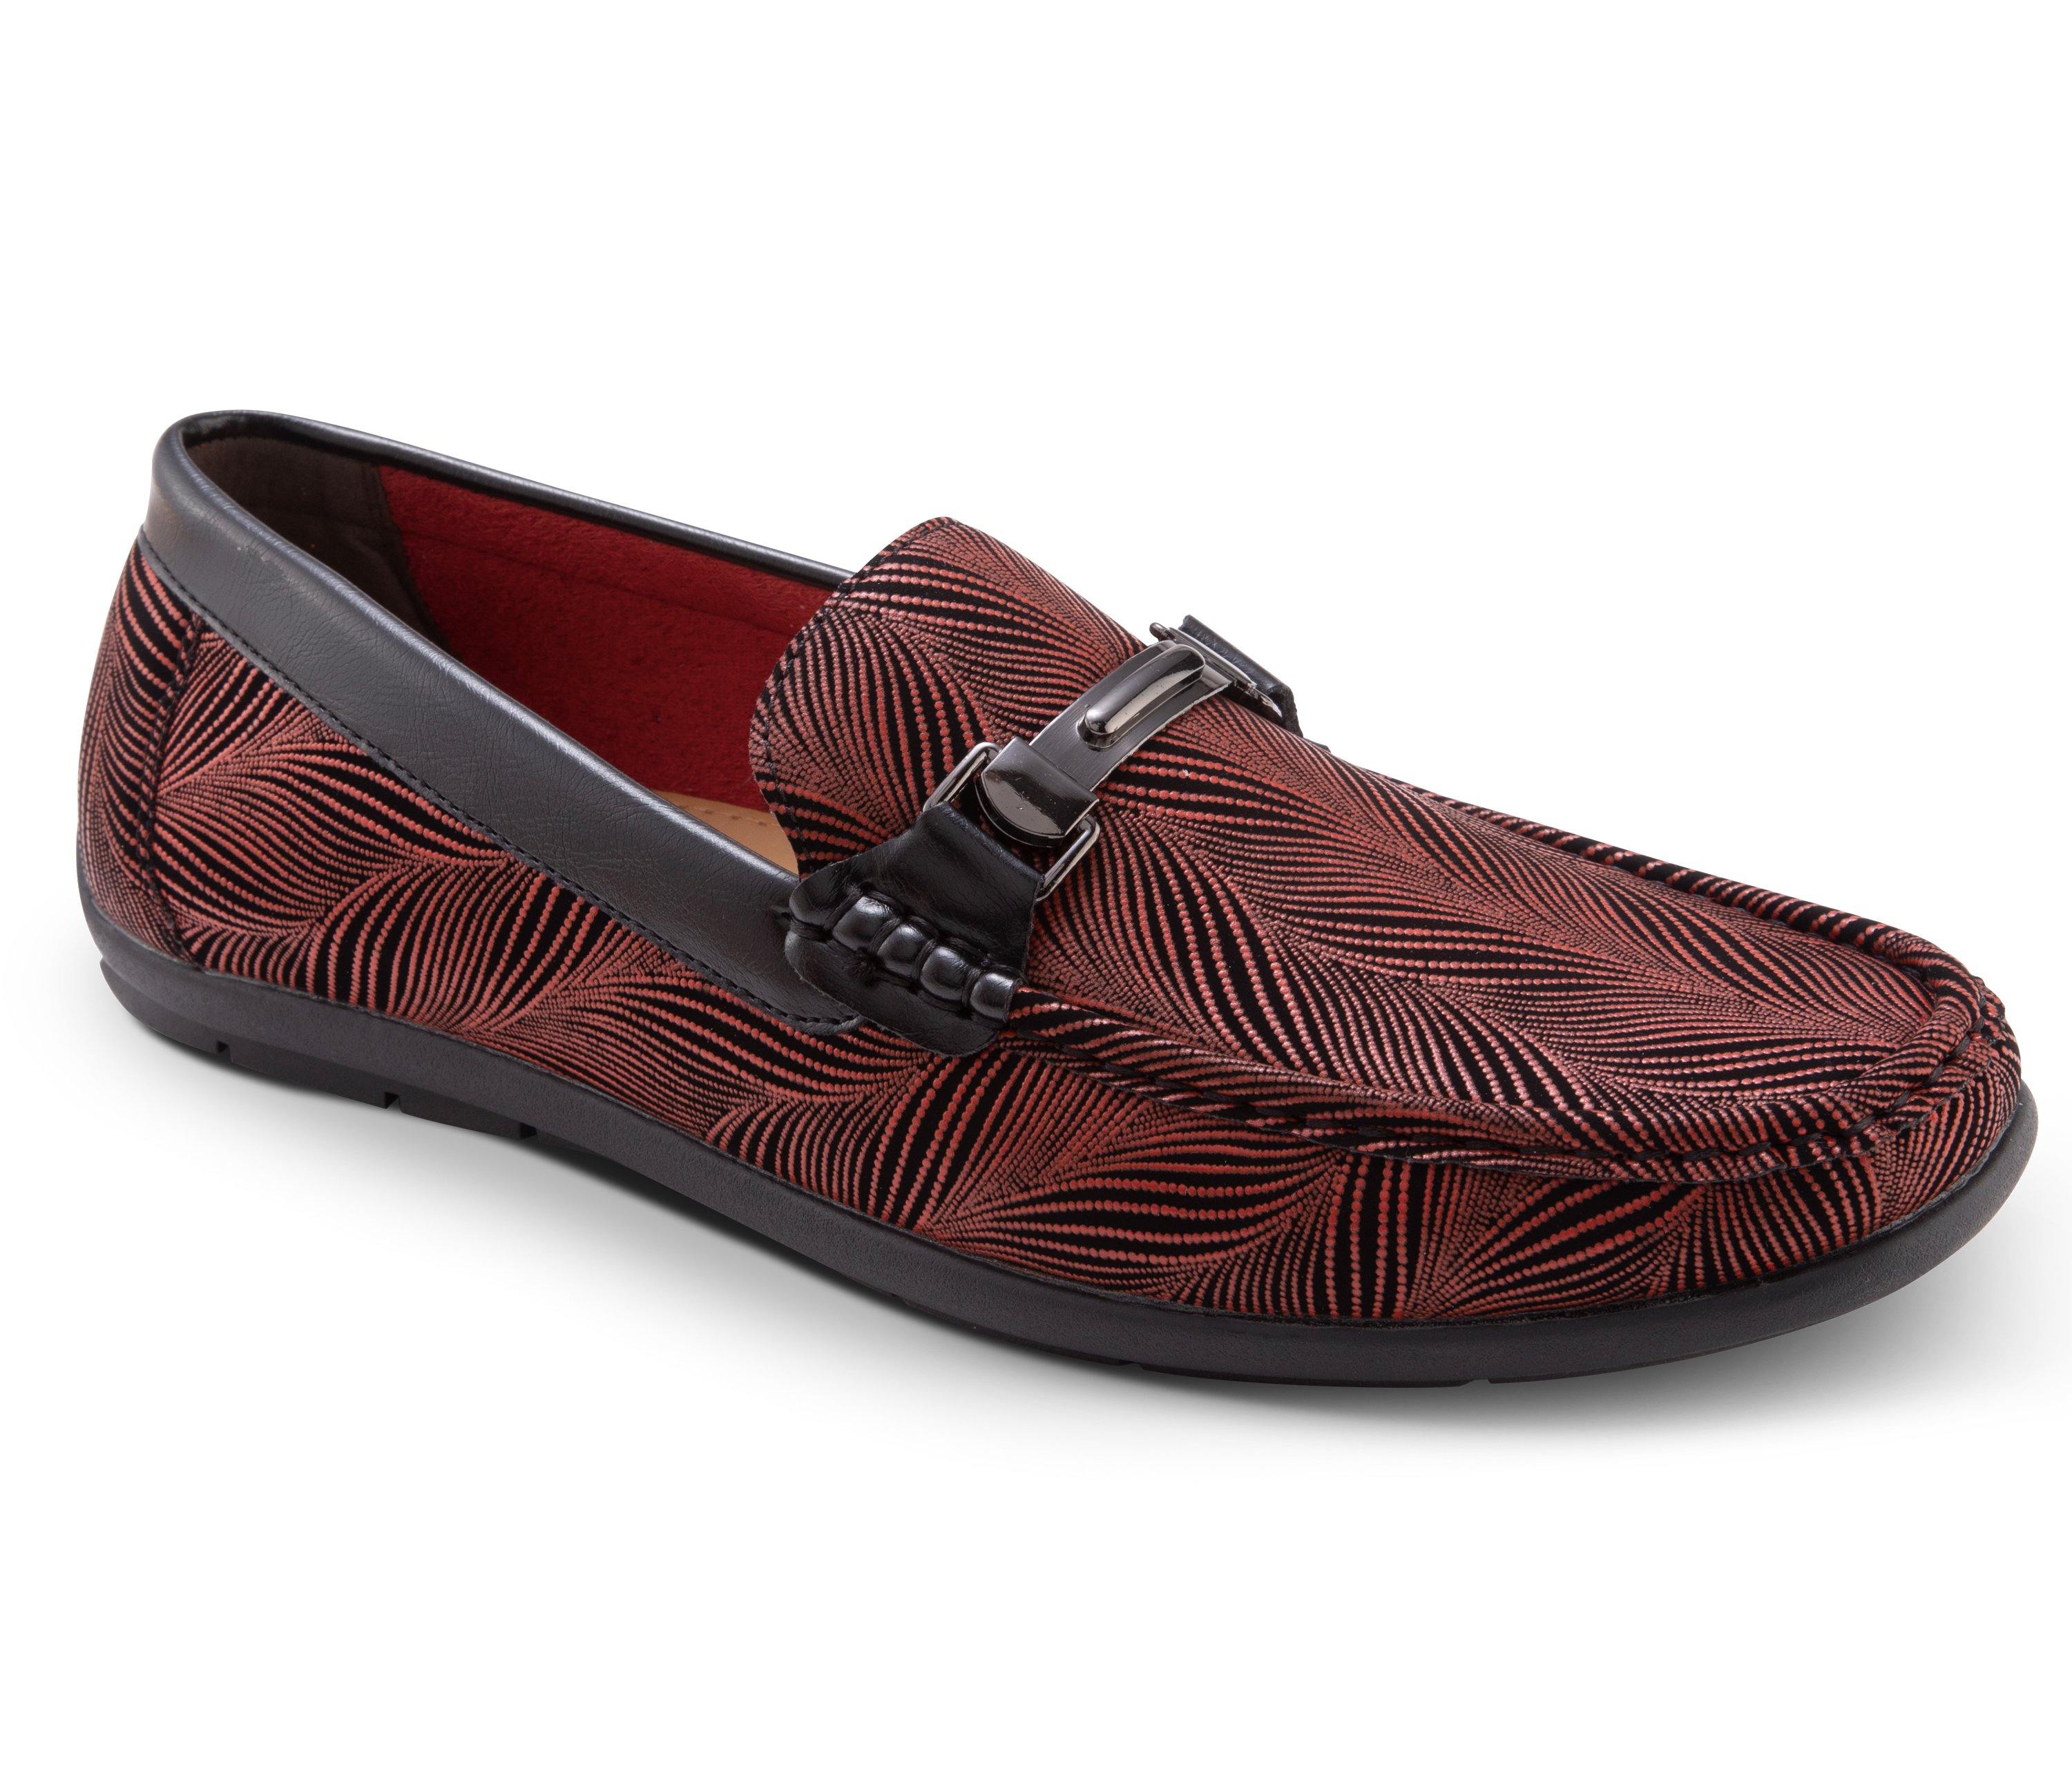 Men's Fashion Loafers Slip-On Shoes Asymmetrical Prints in Burgundy - S81 - Suits & More